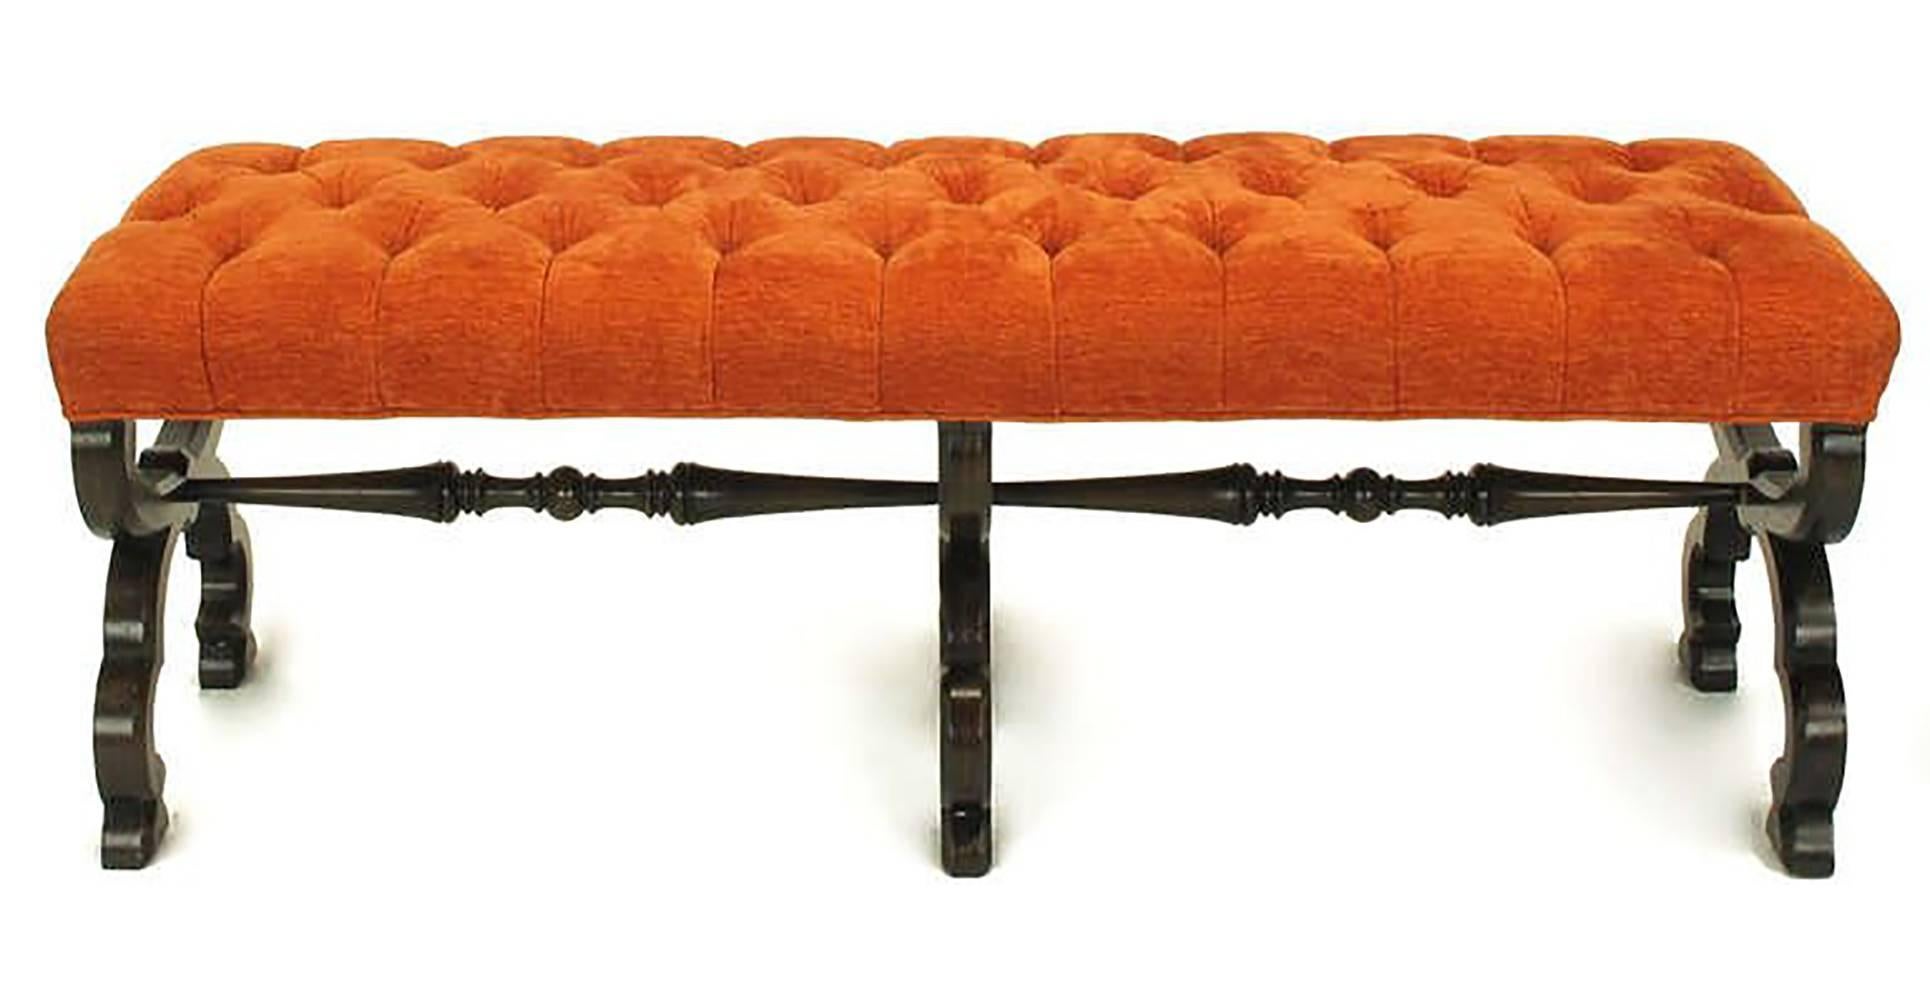 John Widdicomb long trestle bench with carved curile legs and a pair of turned spindle stretchers. Button tufted seat upholstered in a persimmon chenille.